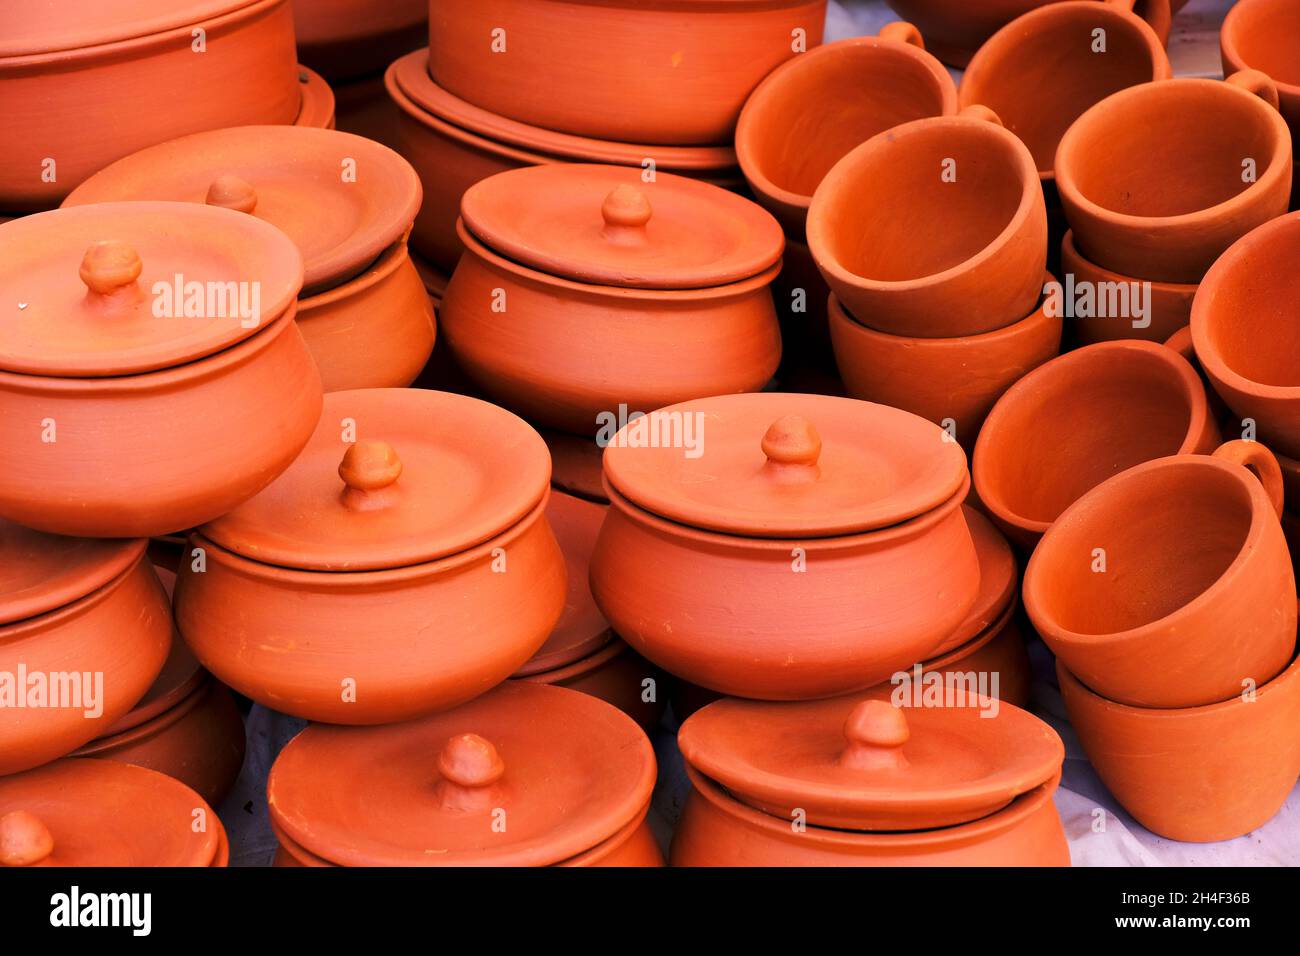 https://c8.alamy.com/comp/2H4F36B/terracotta-pot-cup-kitchen-souvenirs-pile-at-street-handicraft-pottery-shop-handmade-terracotta-products-in-handicraft-market-in-pune-india-2H4F36B.jpg